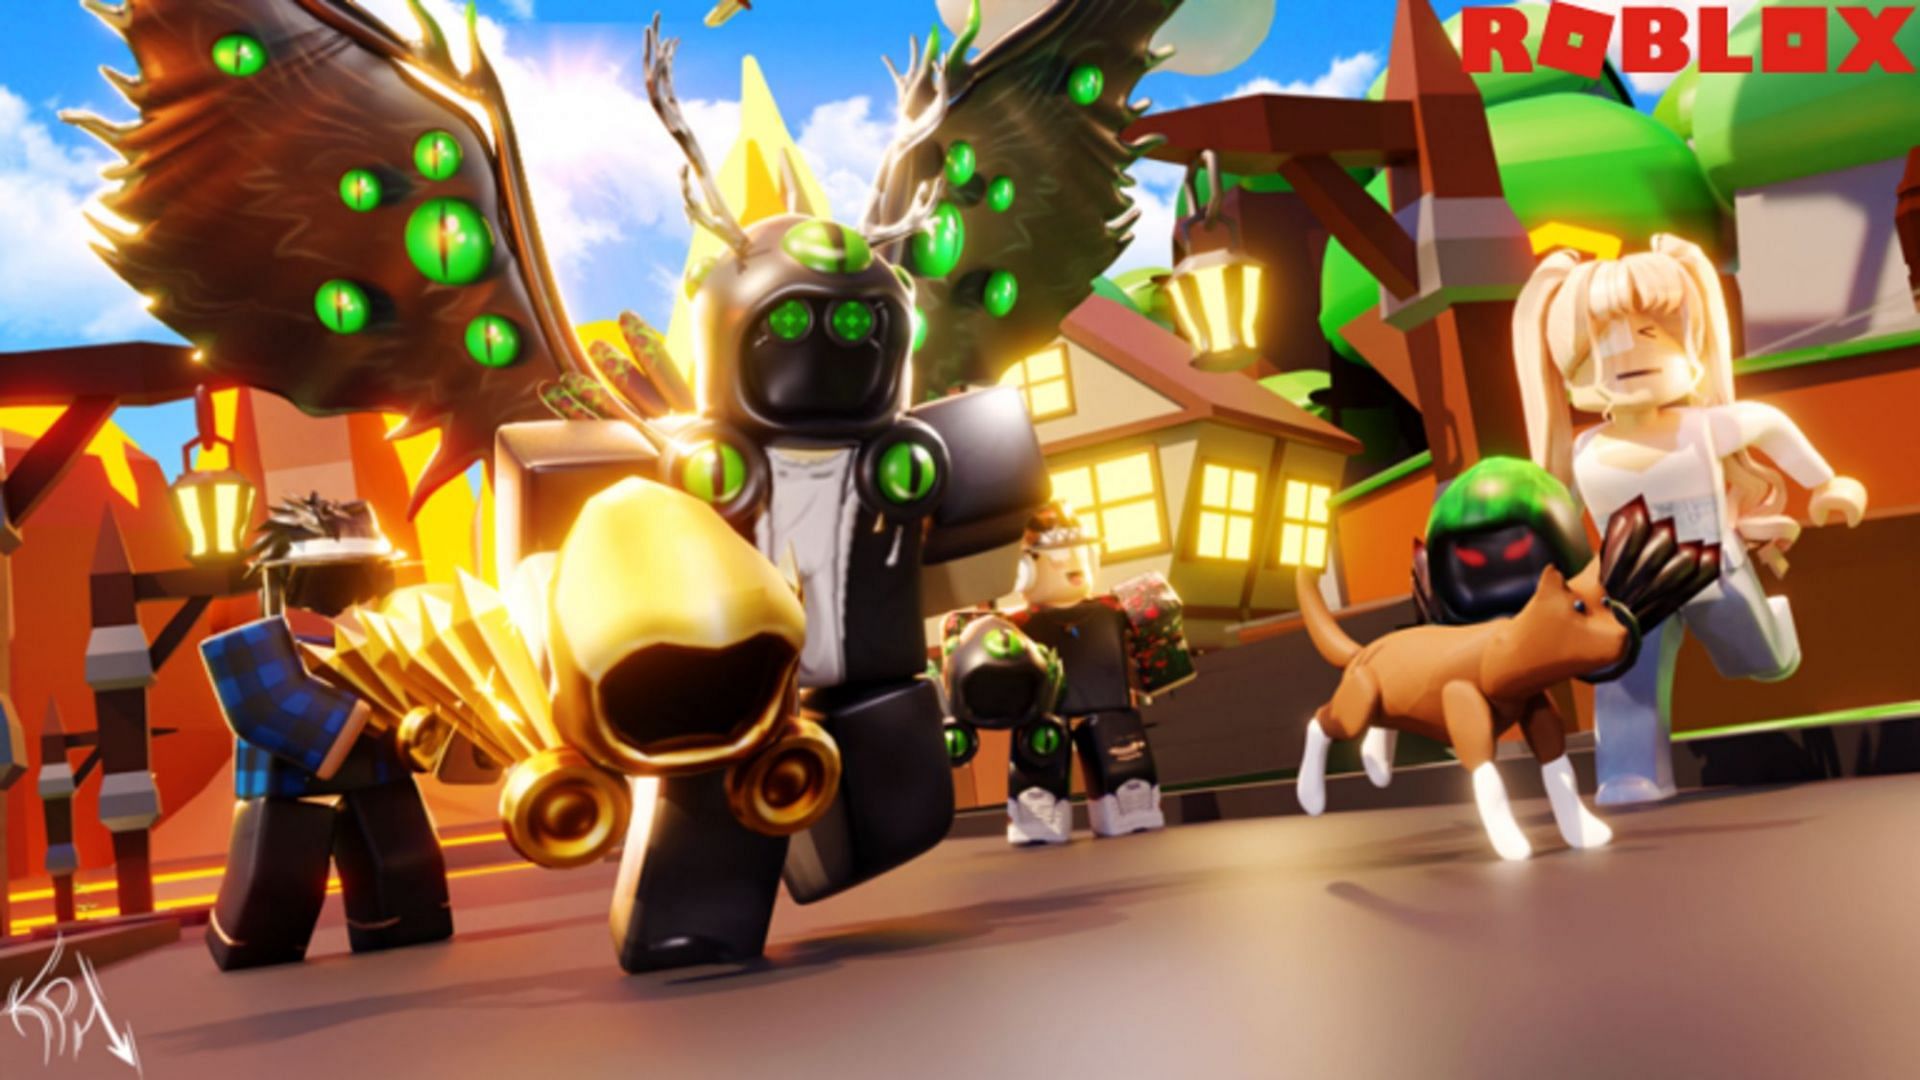 Have weight-lifting battles against friends in Roblox Dominus Lifting Simulator (Image via Roblox)